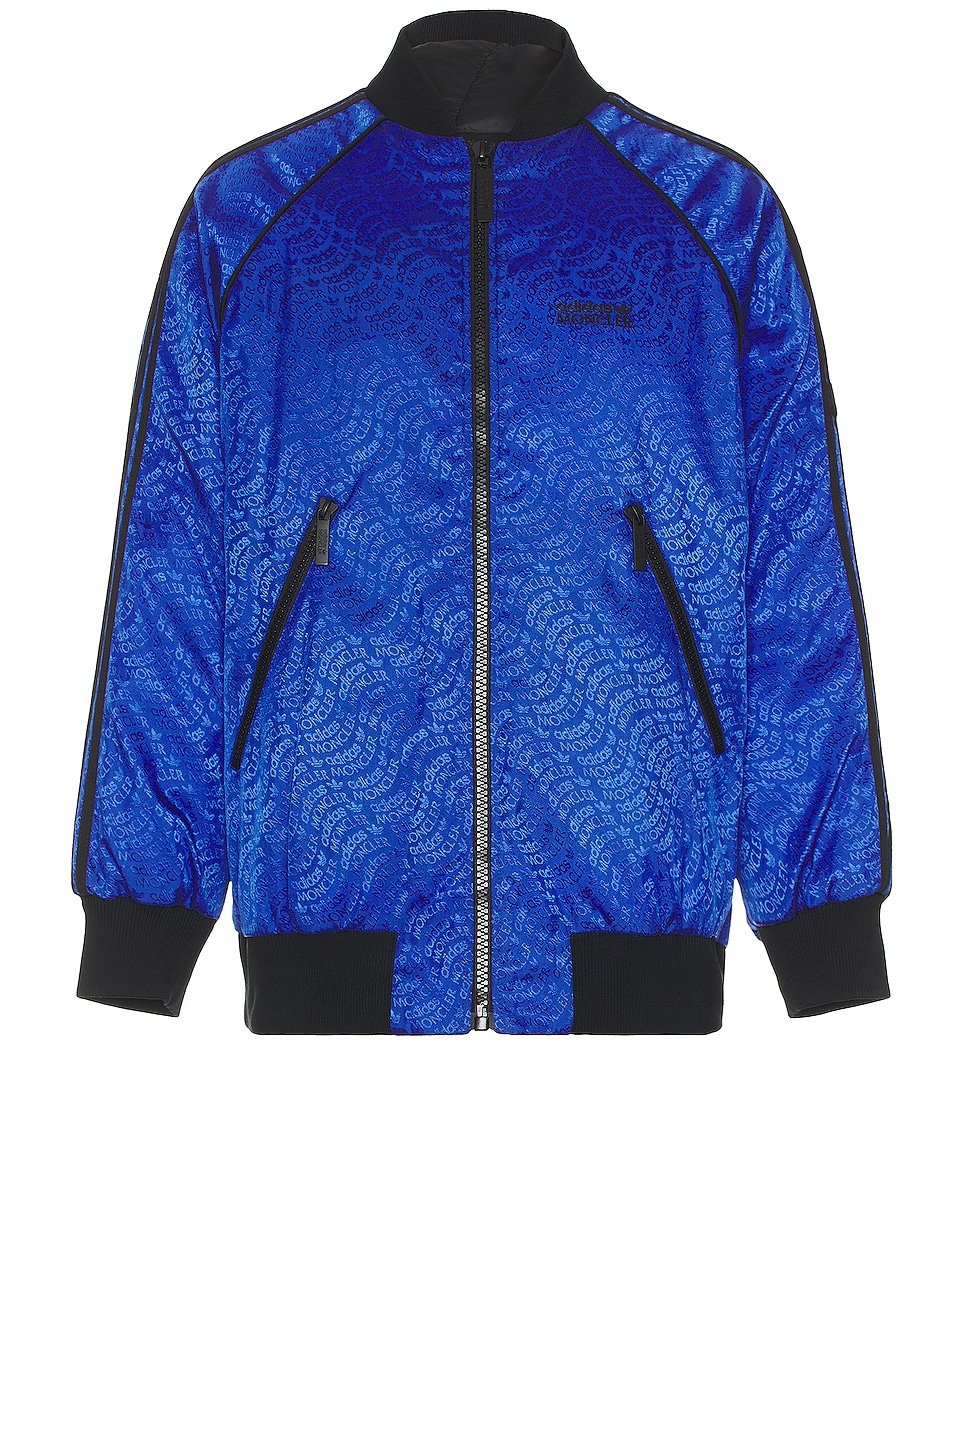 Image 1 of Moncler Genius x Adidas Seelos Bomber Jacket in Blue